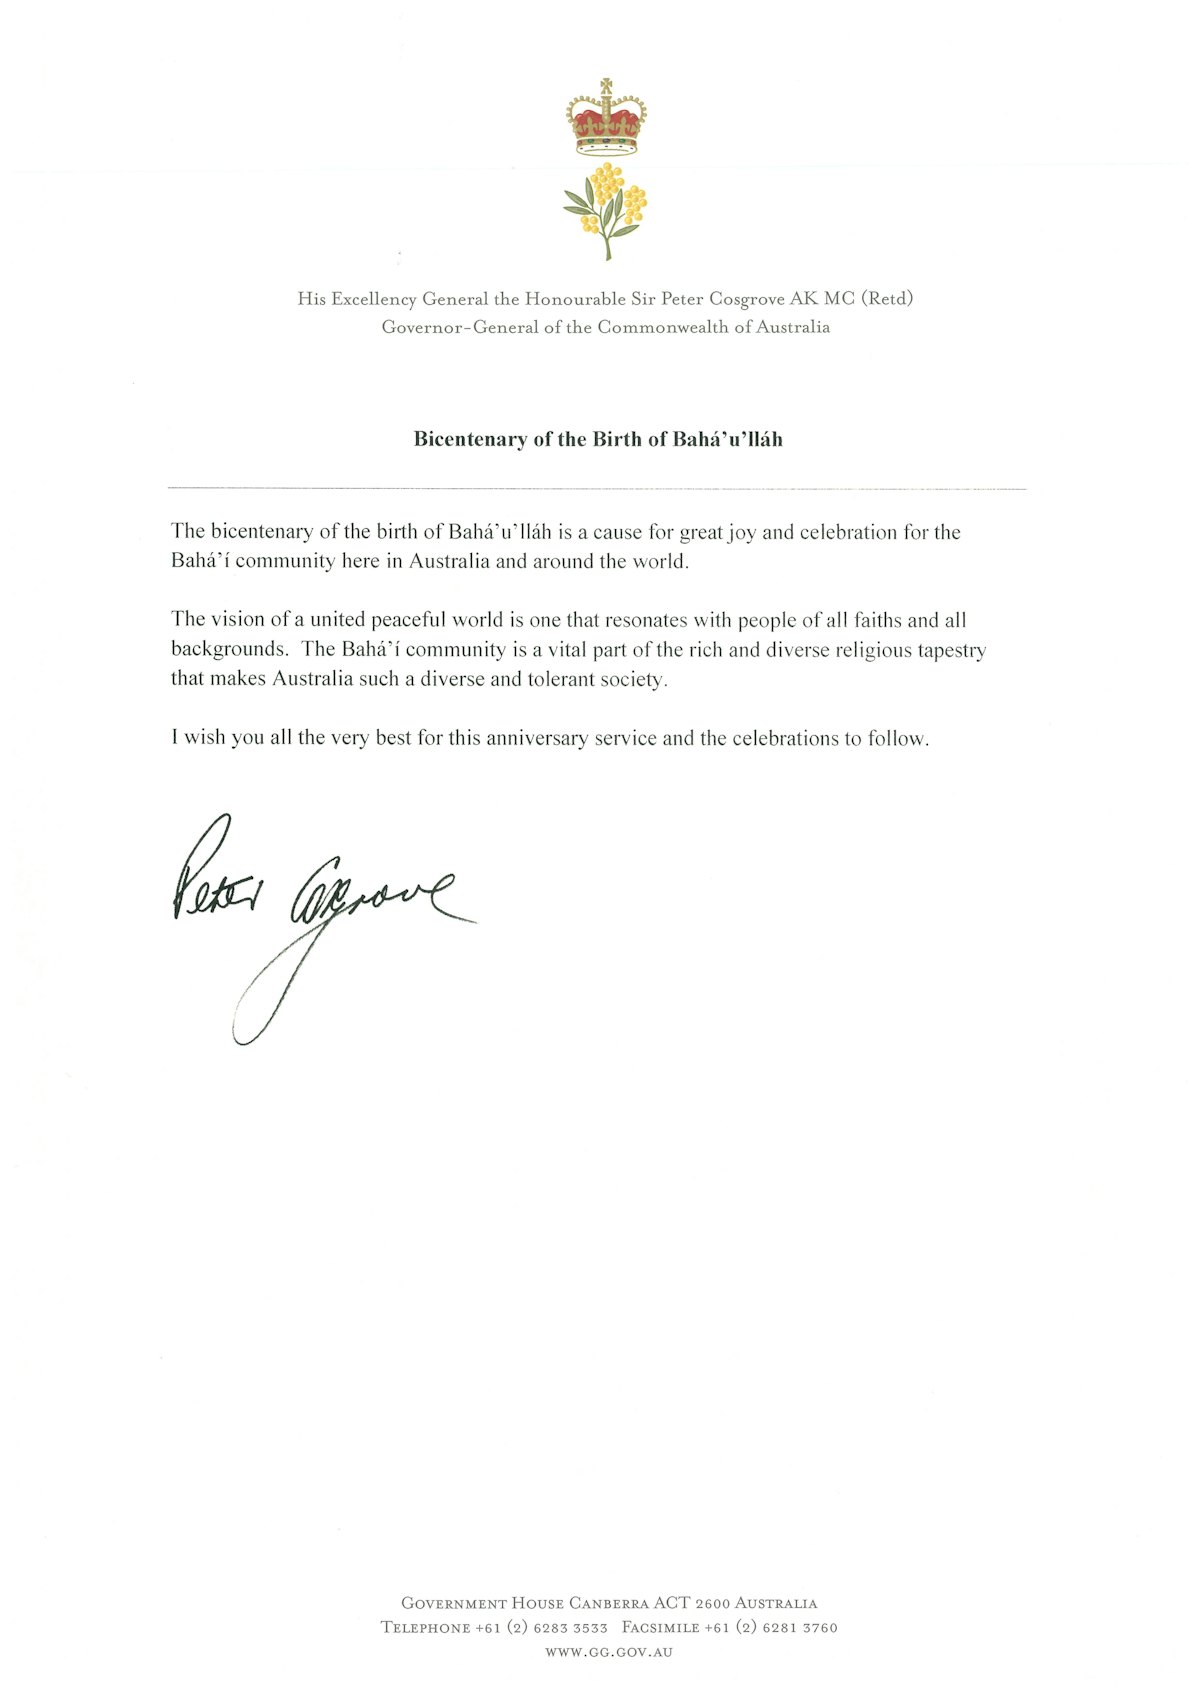 A tribute message from Governor General Peter Cosgrove